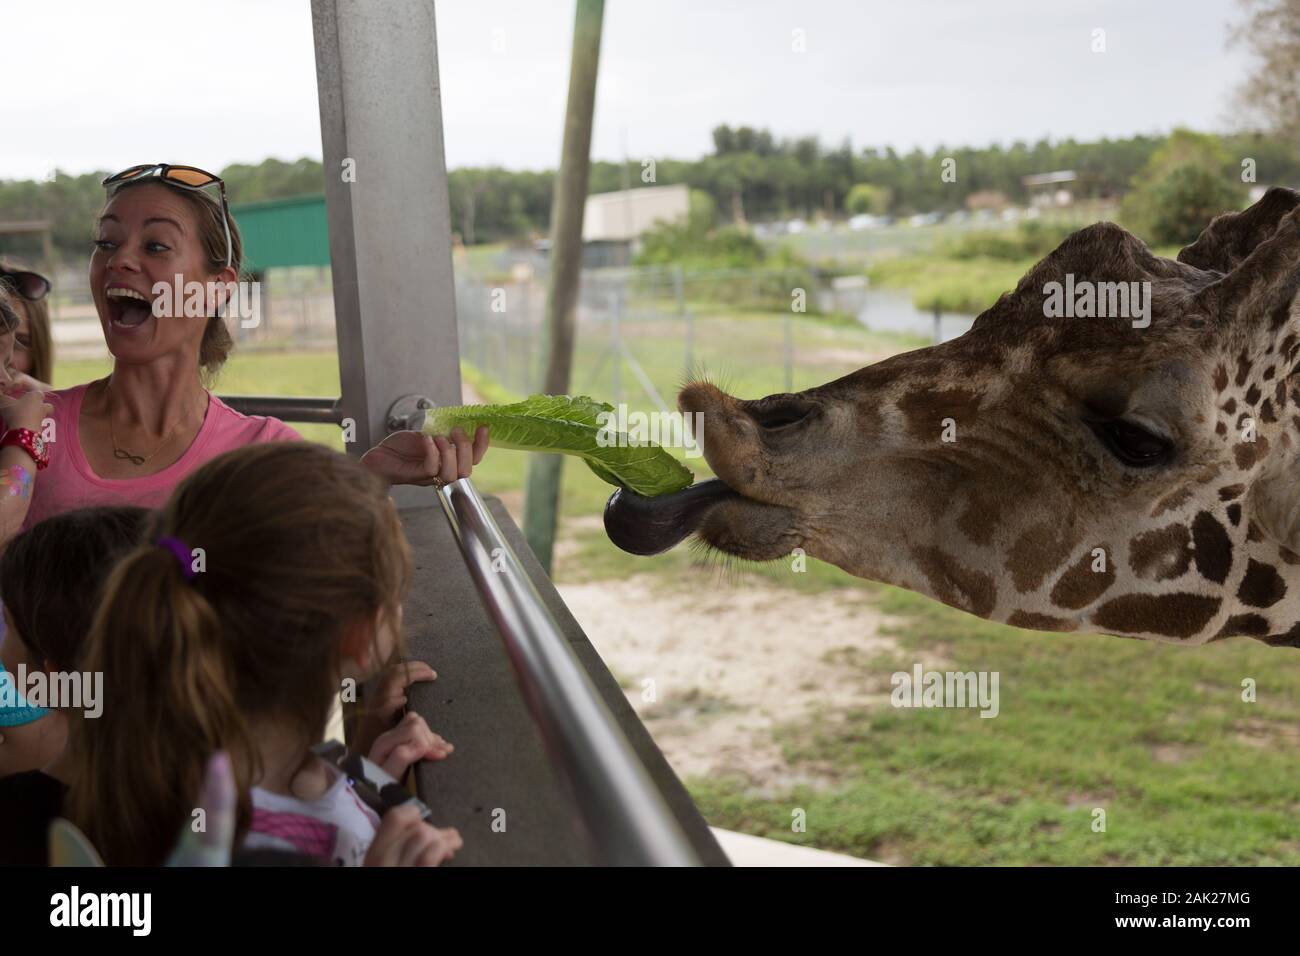 A female Lion Country Safari guest reacts with joyous excitement as a hungry giraffe snags a fresh piece of lettuce from her with his tongue. Stock Photo